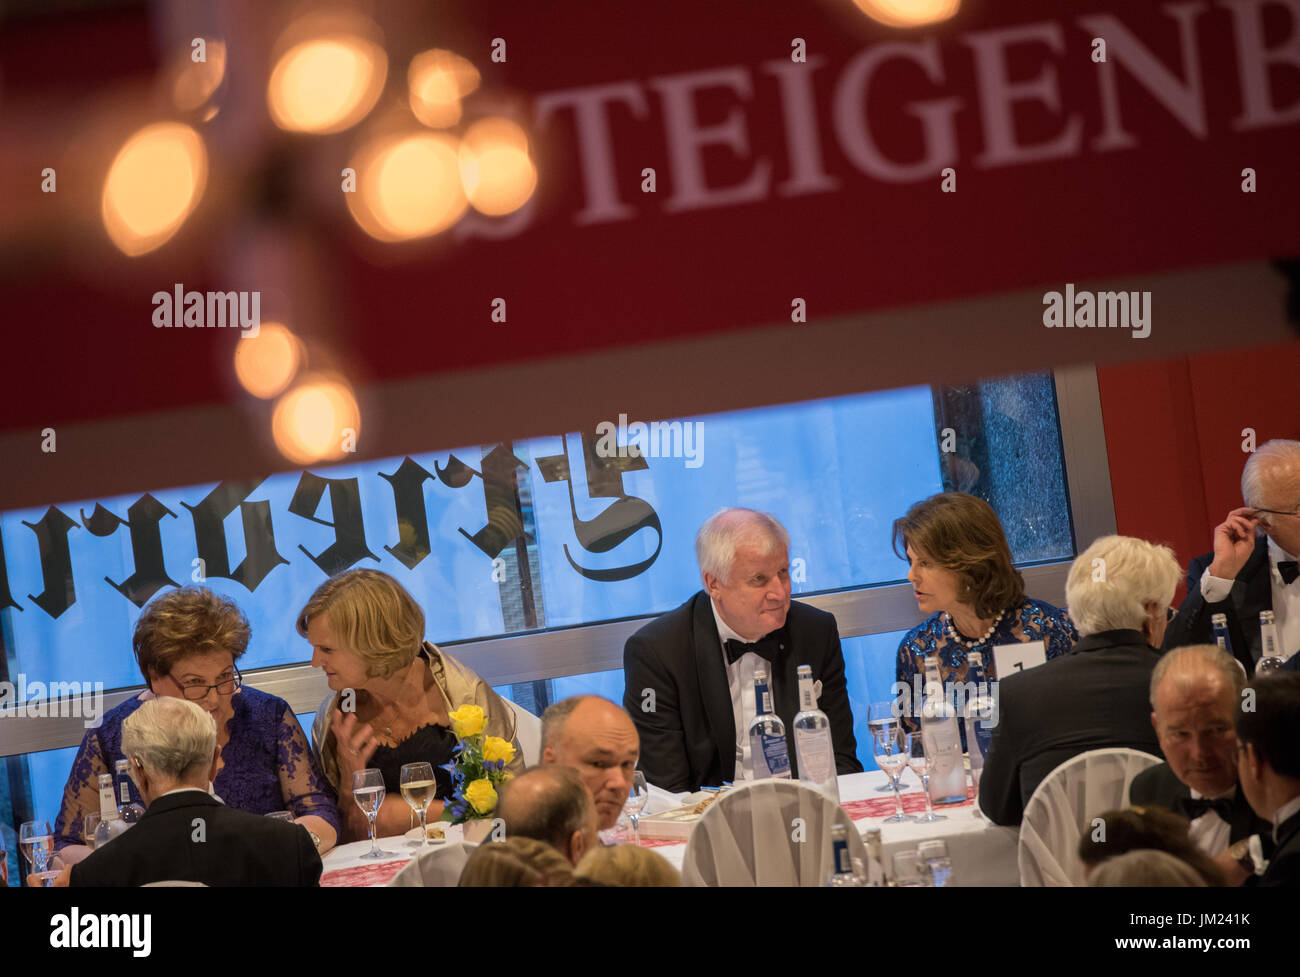 Bayreuth, Germany. 25th July, 2017. Sweden's Queen Silvia (r) speaking with Bavarian premier Horst Seehofer (CSU, 2.f.r) during an interval at the opening of the Bayreuth Festival in Bayreuth, Germany, 25 July 2017. Beside them, Karin Seehofer (2.f.l.) is speaking with president of the Bavarian Landtag parliament, Barbara Stamm (L). The festival opens with the opera 'Die Meistersinger von Nuernberg' (The Master-Singers of Nuremberg). Photo: Nicolas Armer/dpa/Alamy Live News Stock Photo